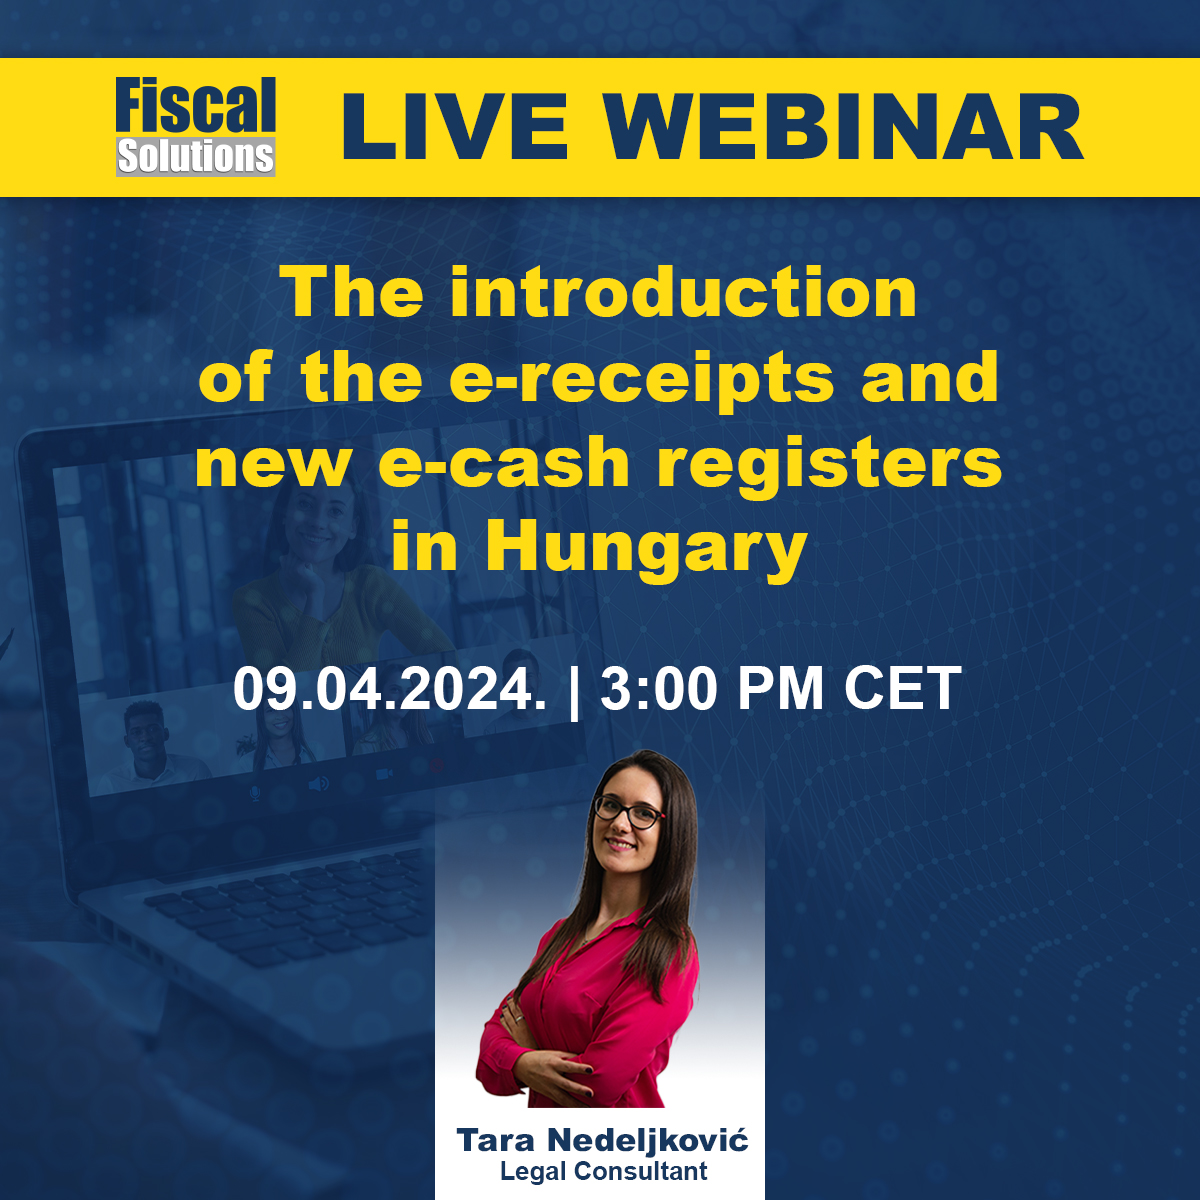 Are you ready for the upcoming webinar?

Tomorrow will be a unique opportunity for you to gain the knowledge necessary to manage the introduction of electronic receipts and new electronic cash registers in #Hungary.

This #webinar will be an invaluable resource for anyone…